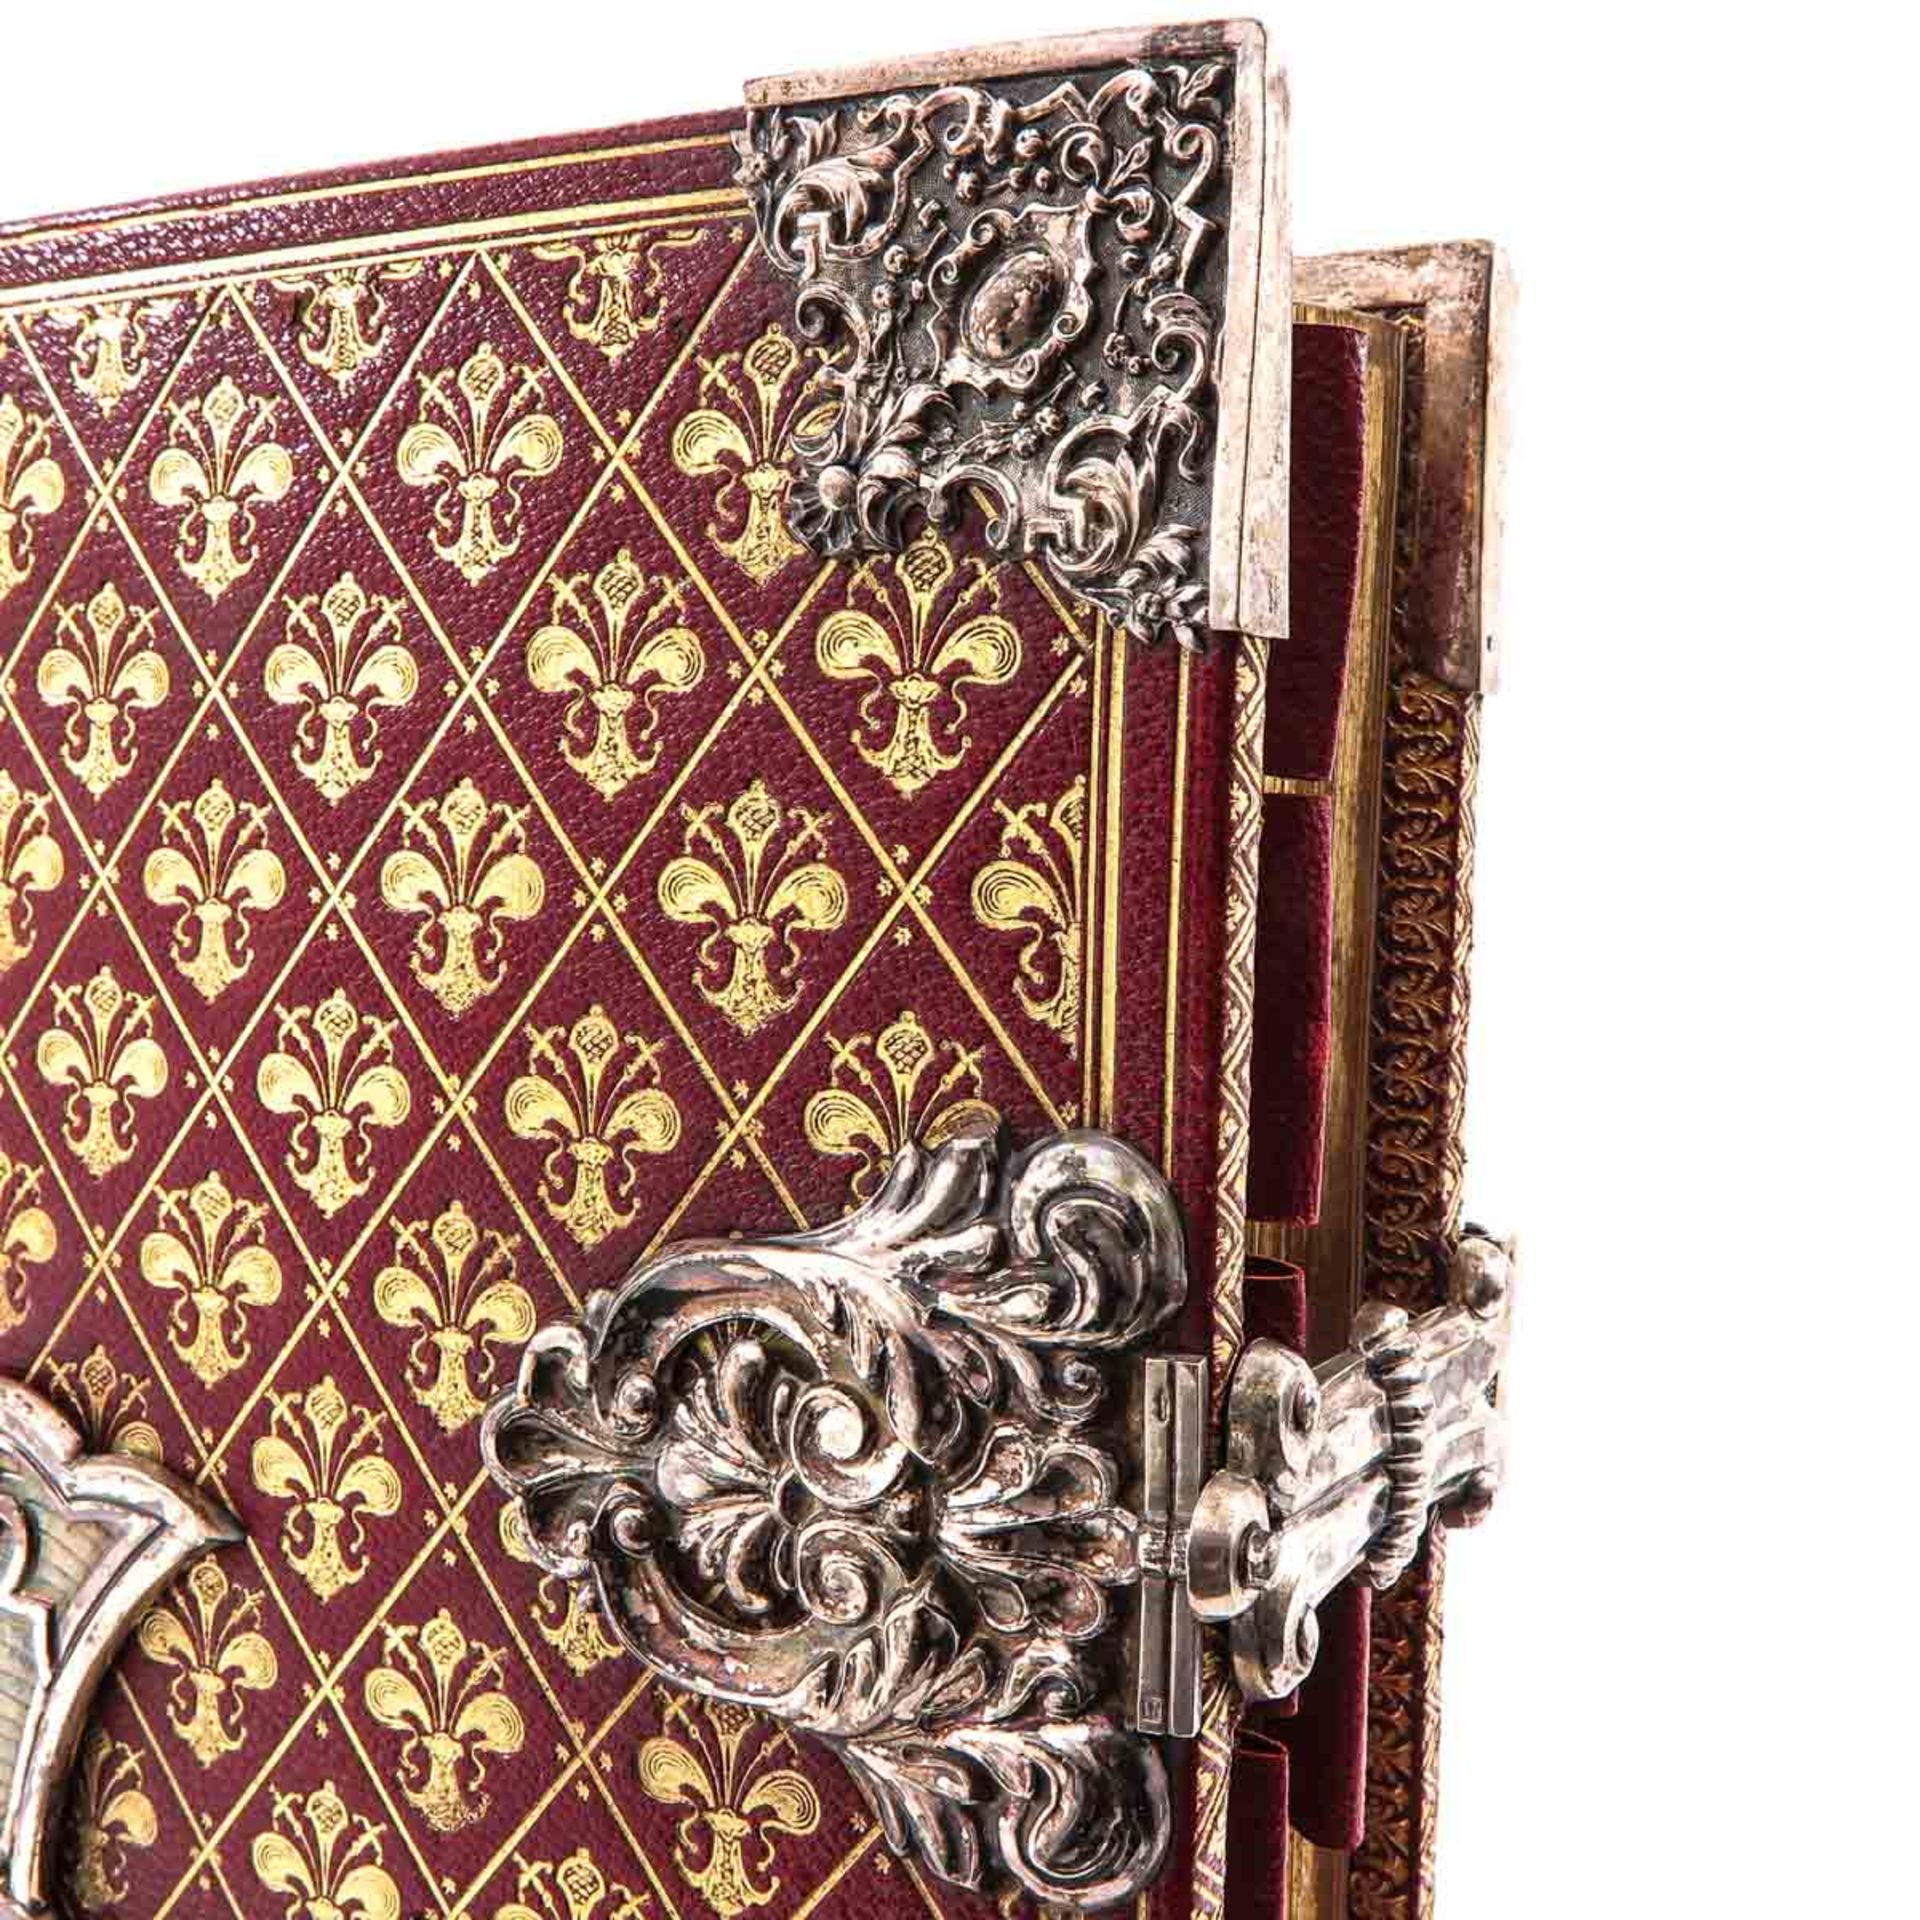 A 19th Century Missal with Beautiful Silver Fittings - Image 7 of 10